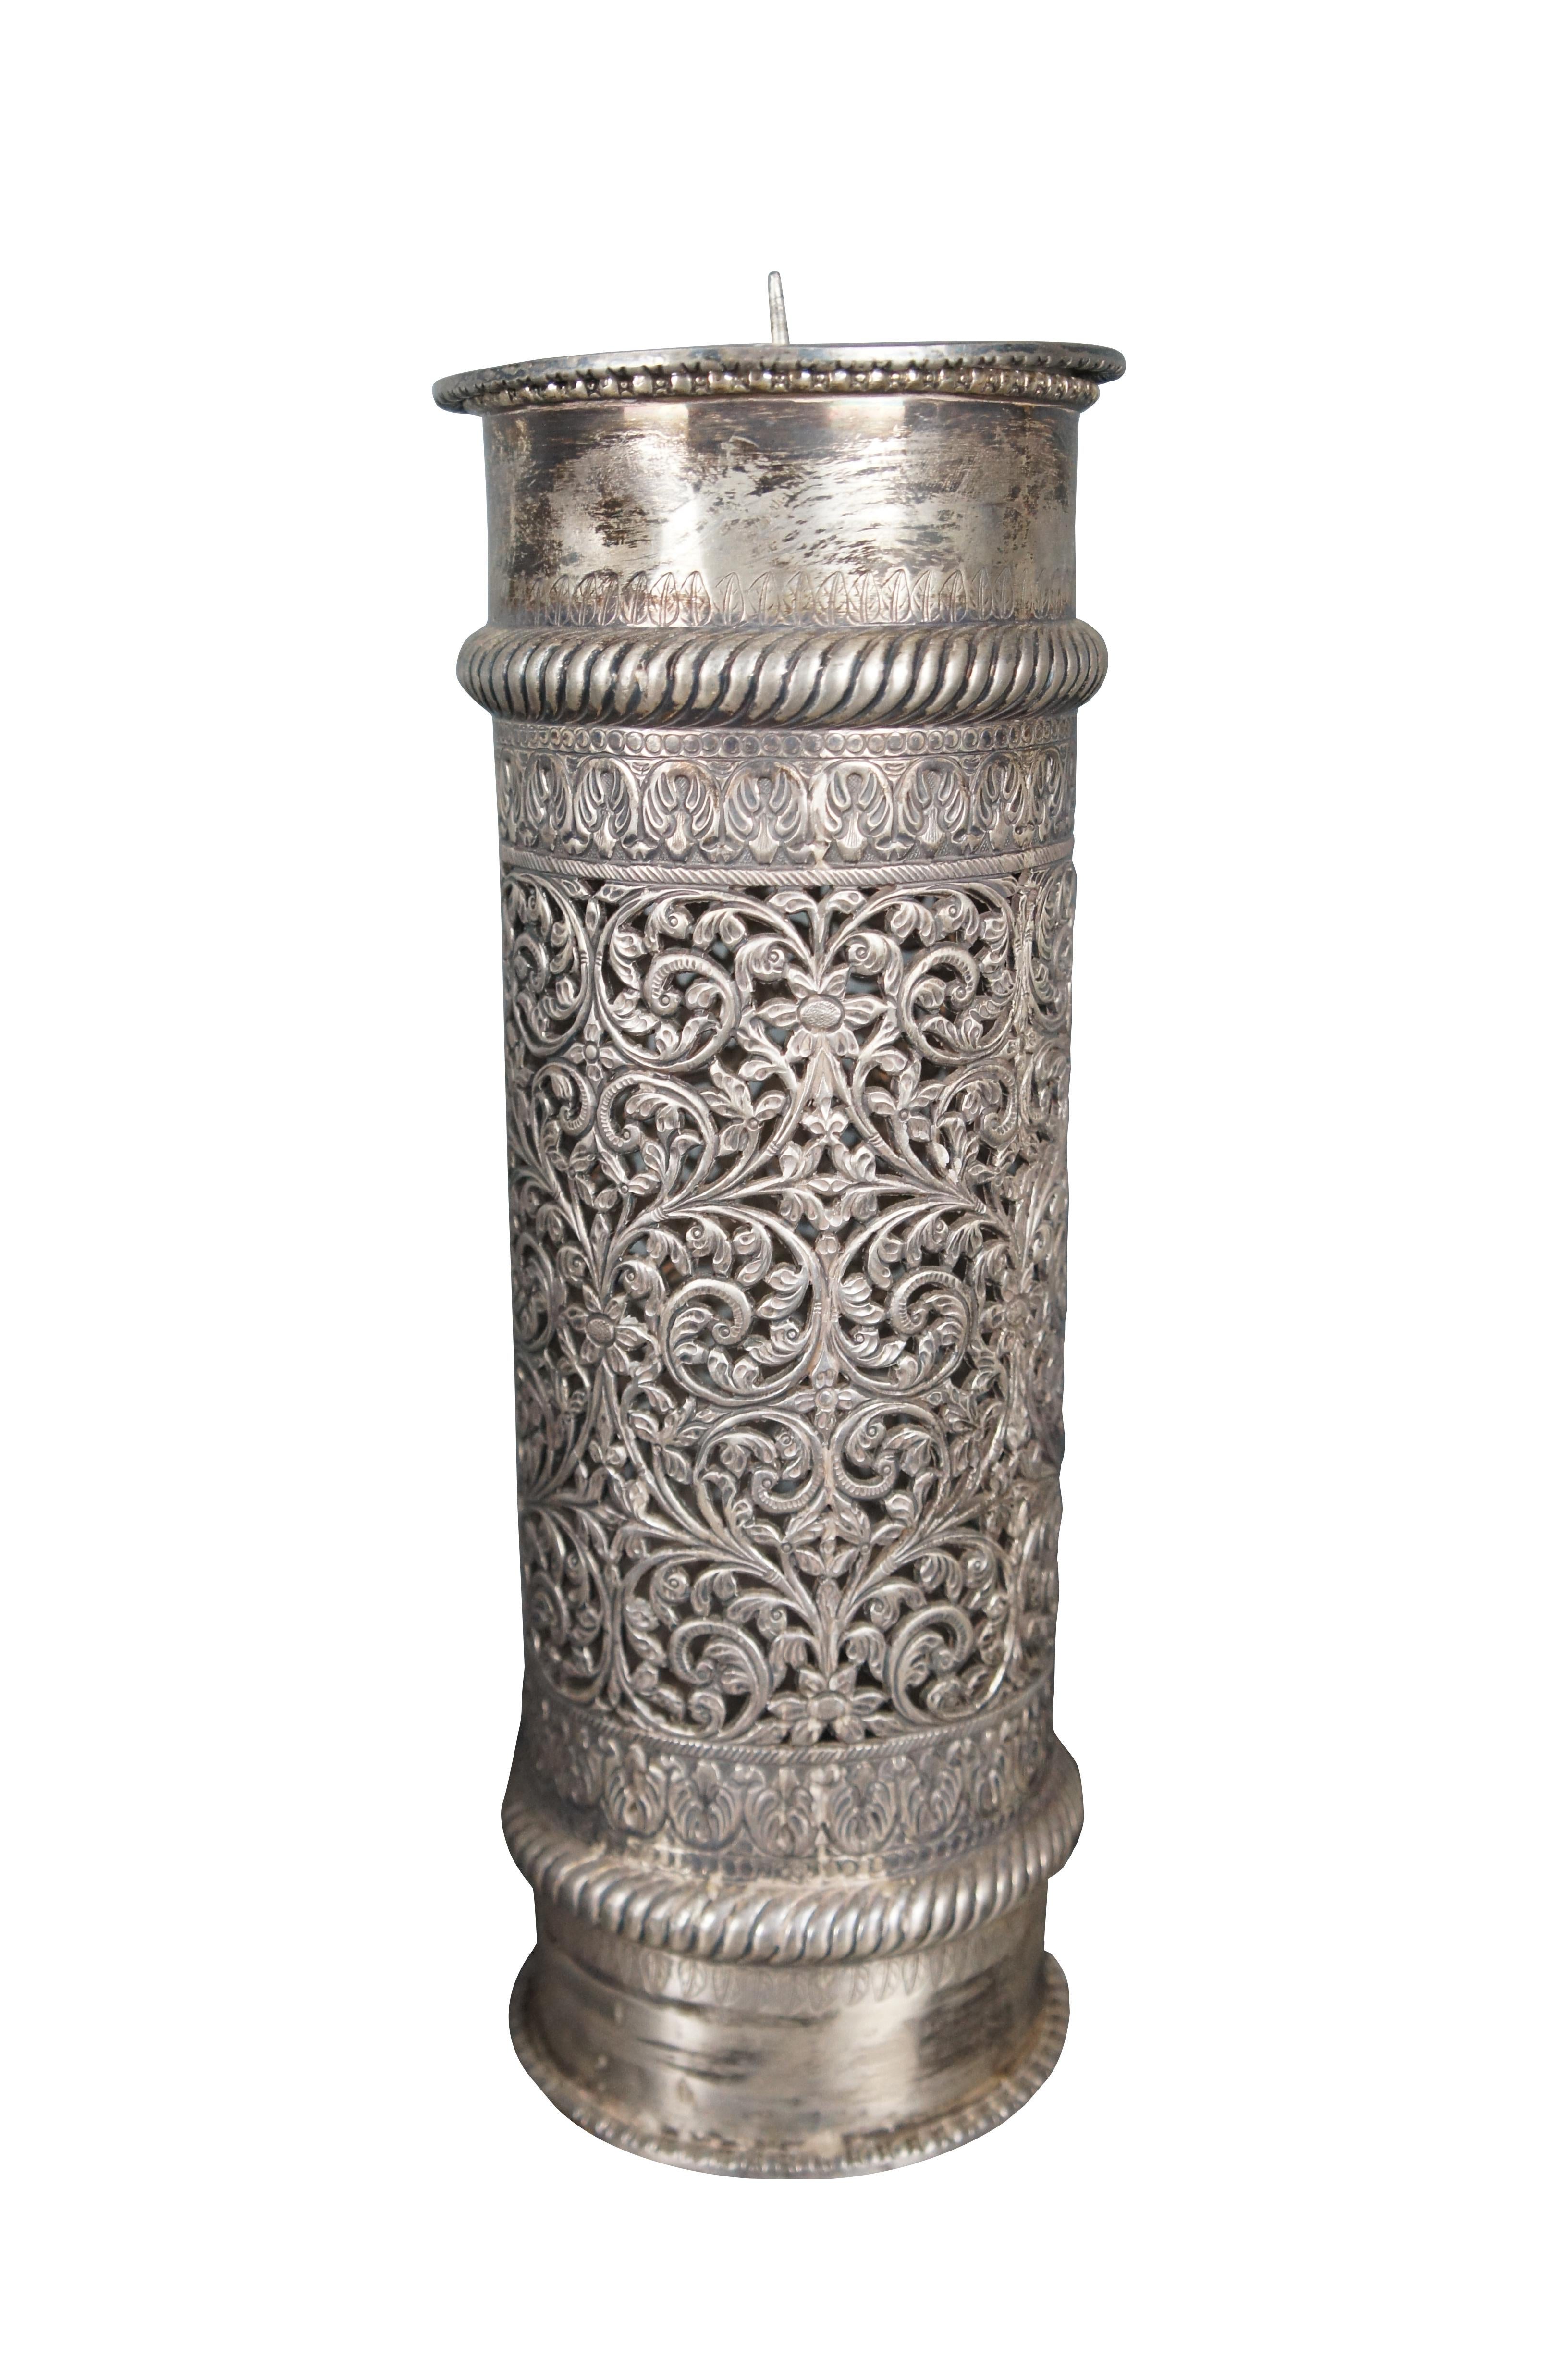 Set of 5 Moroccan Reticulated Silver Ornate Candlesticks Candle Holder 9